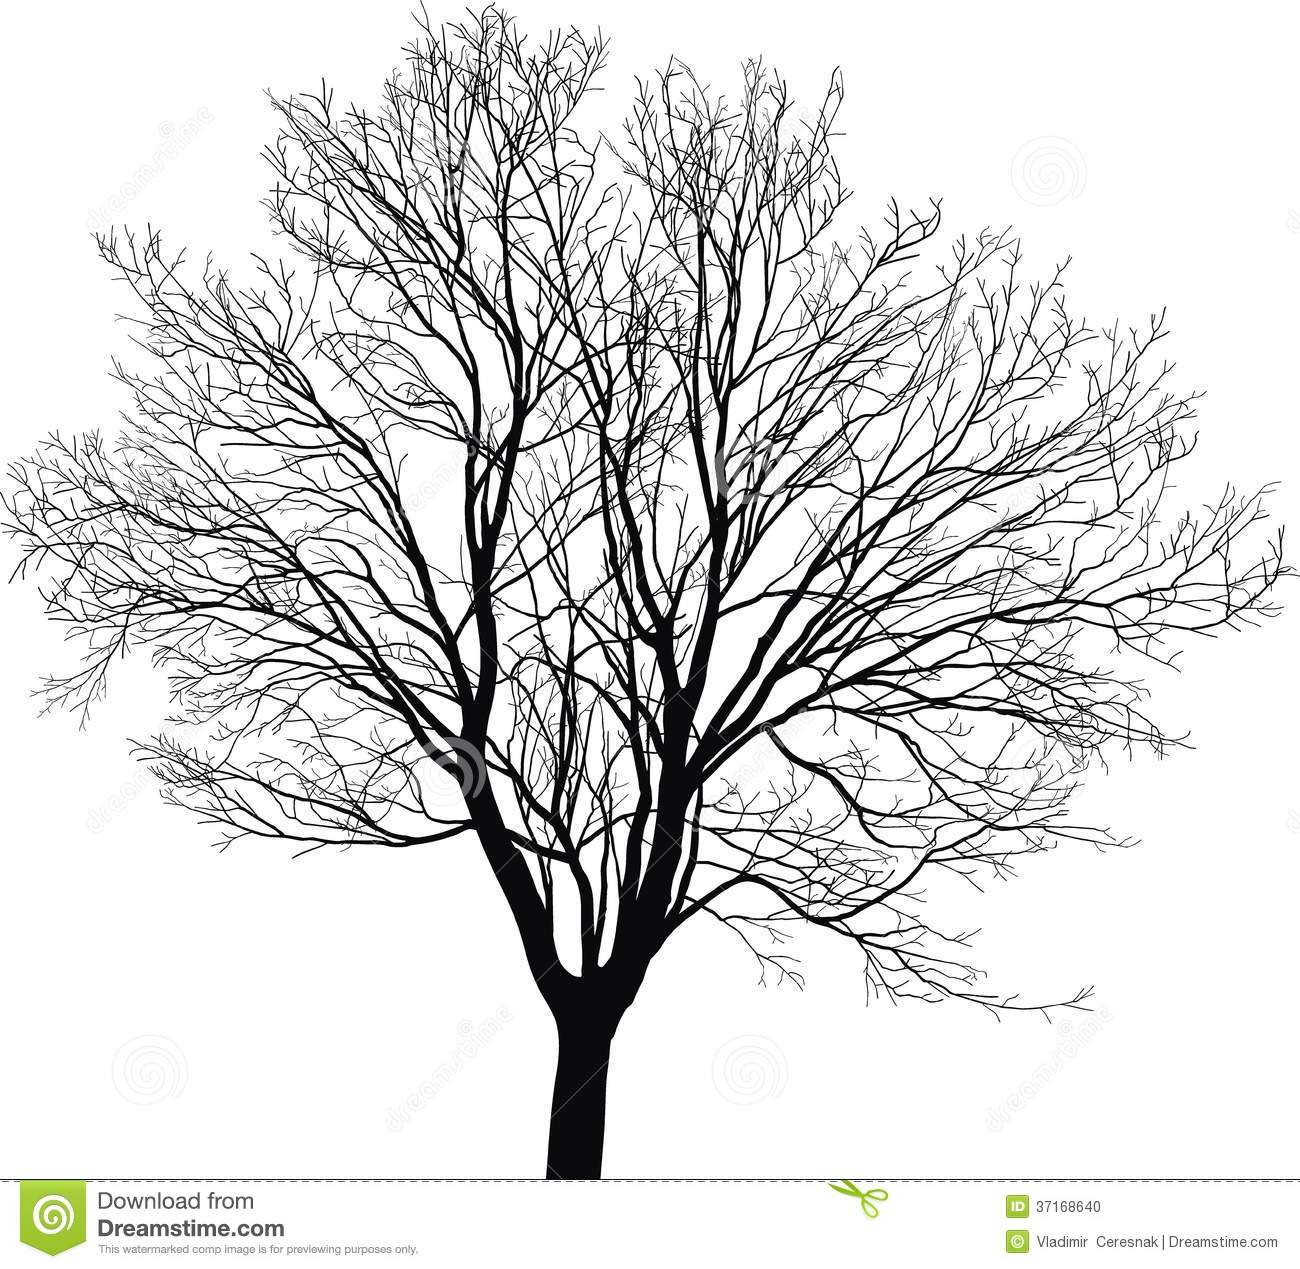 Silhouette Maple Tree Black Drawings On A White Background